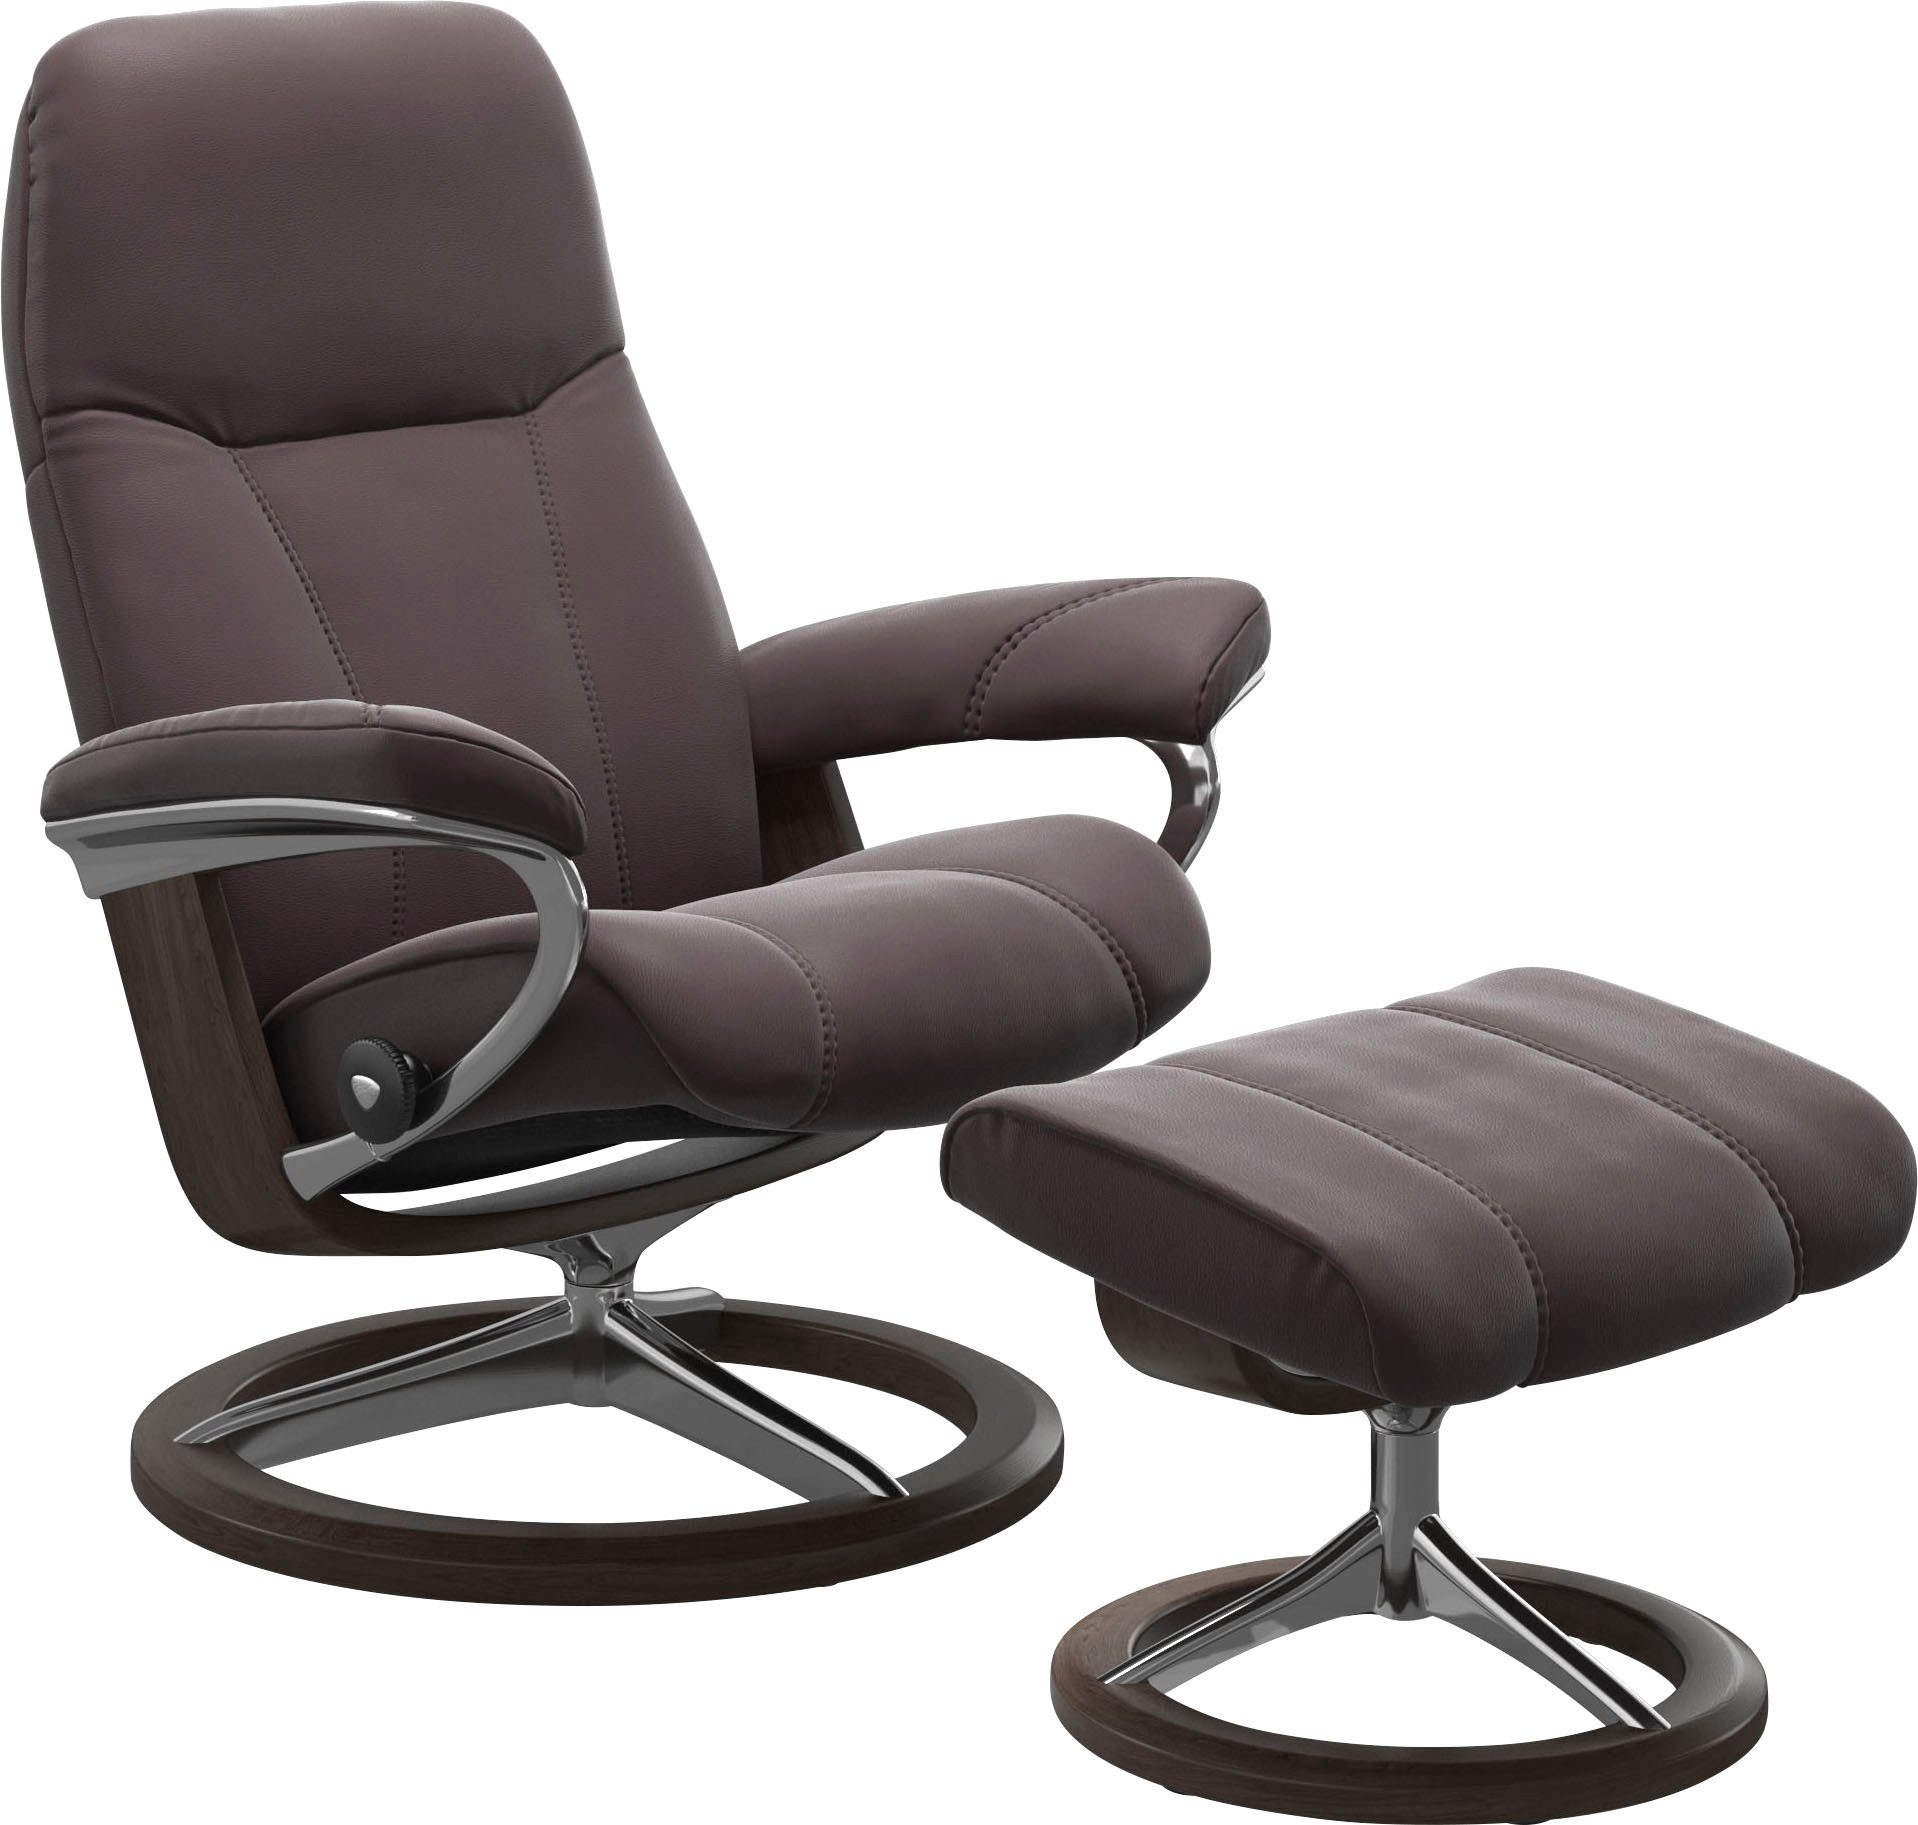 Größe Relaxsessel Base, Gestell S, Signature Wenge Consul, mit Stressless®